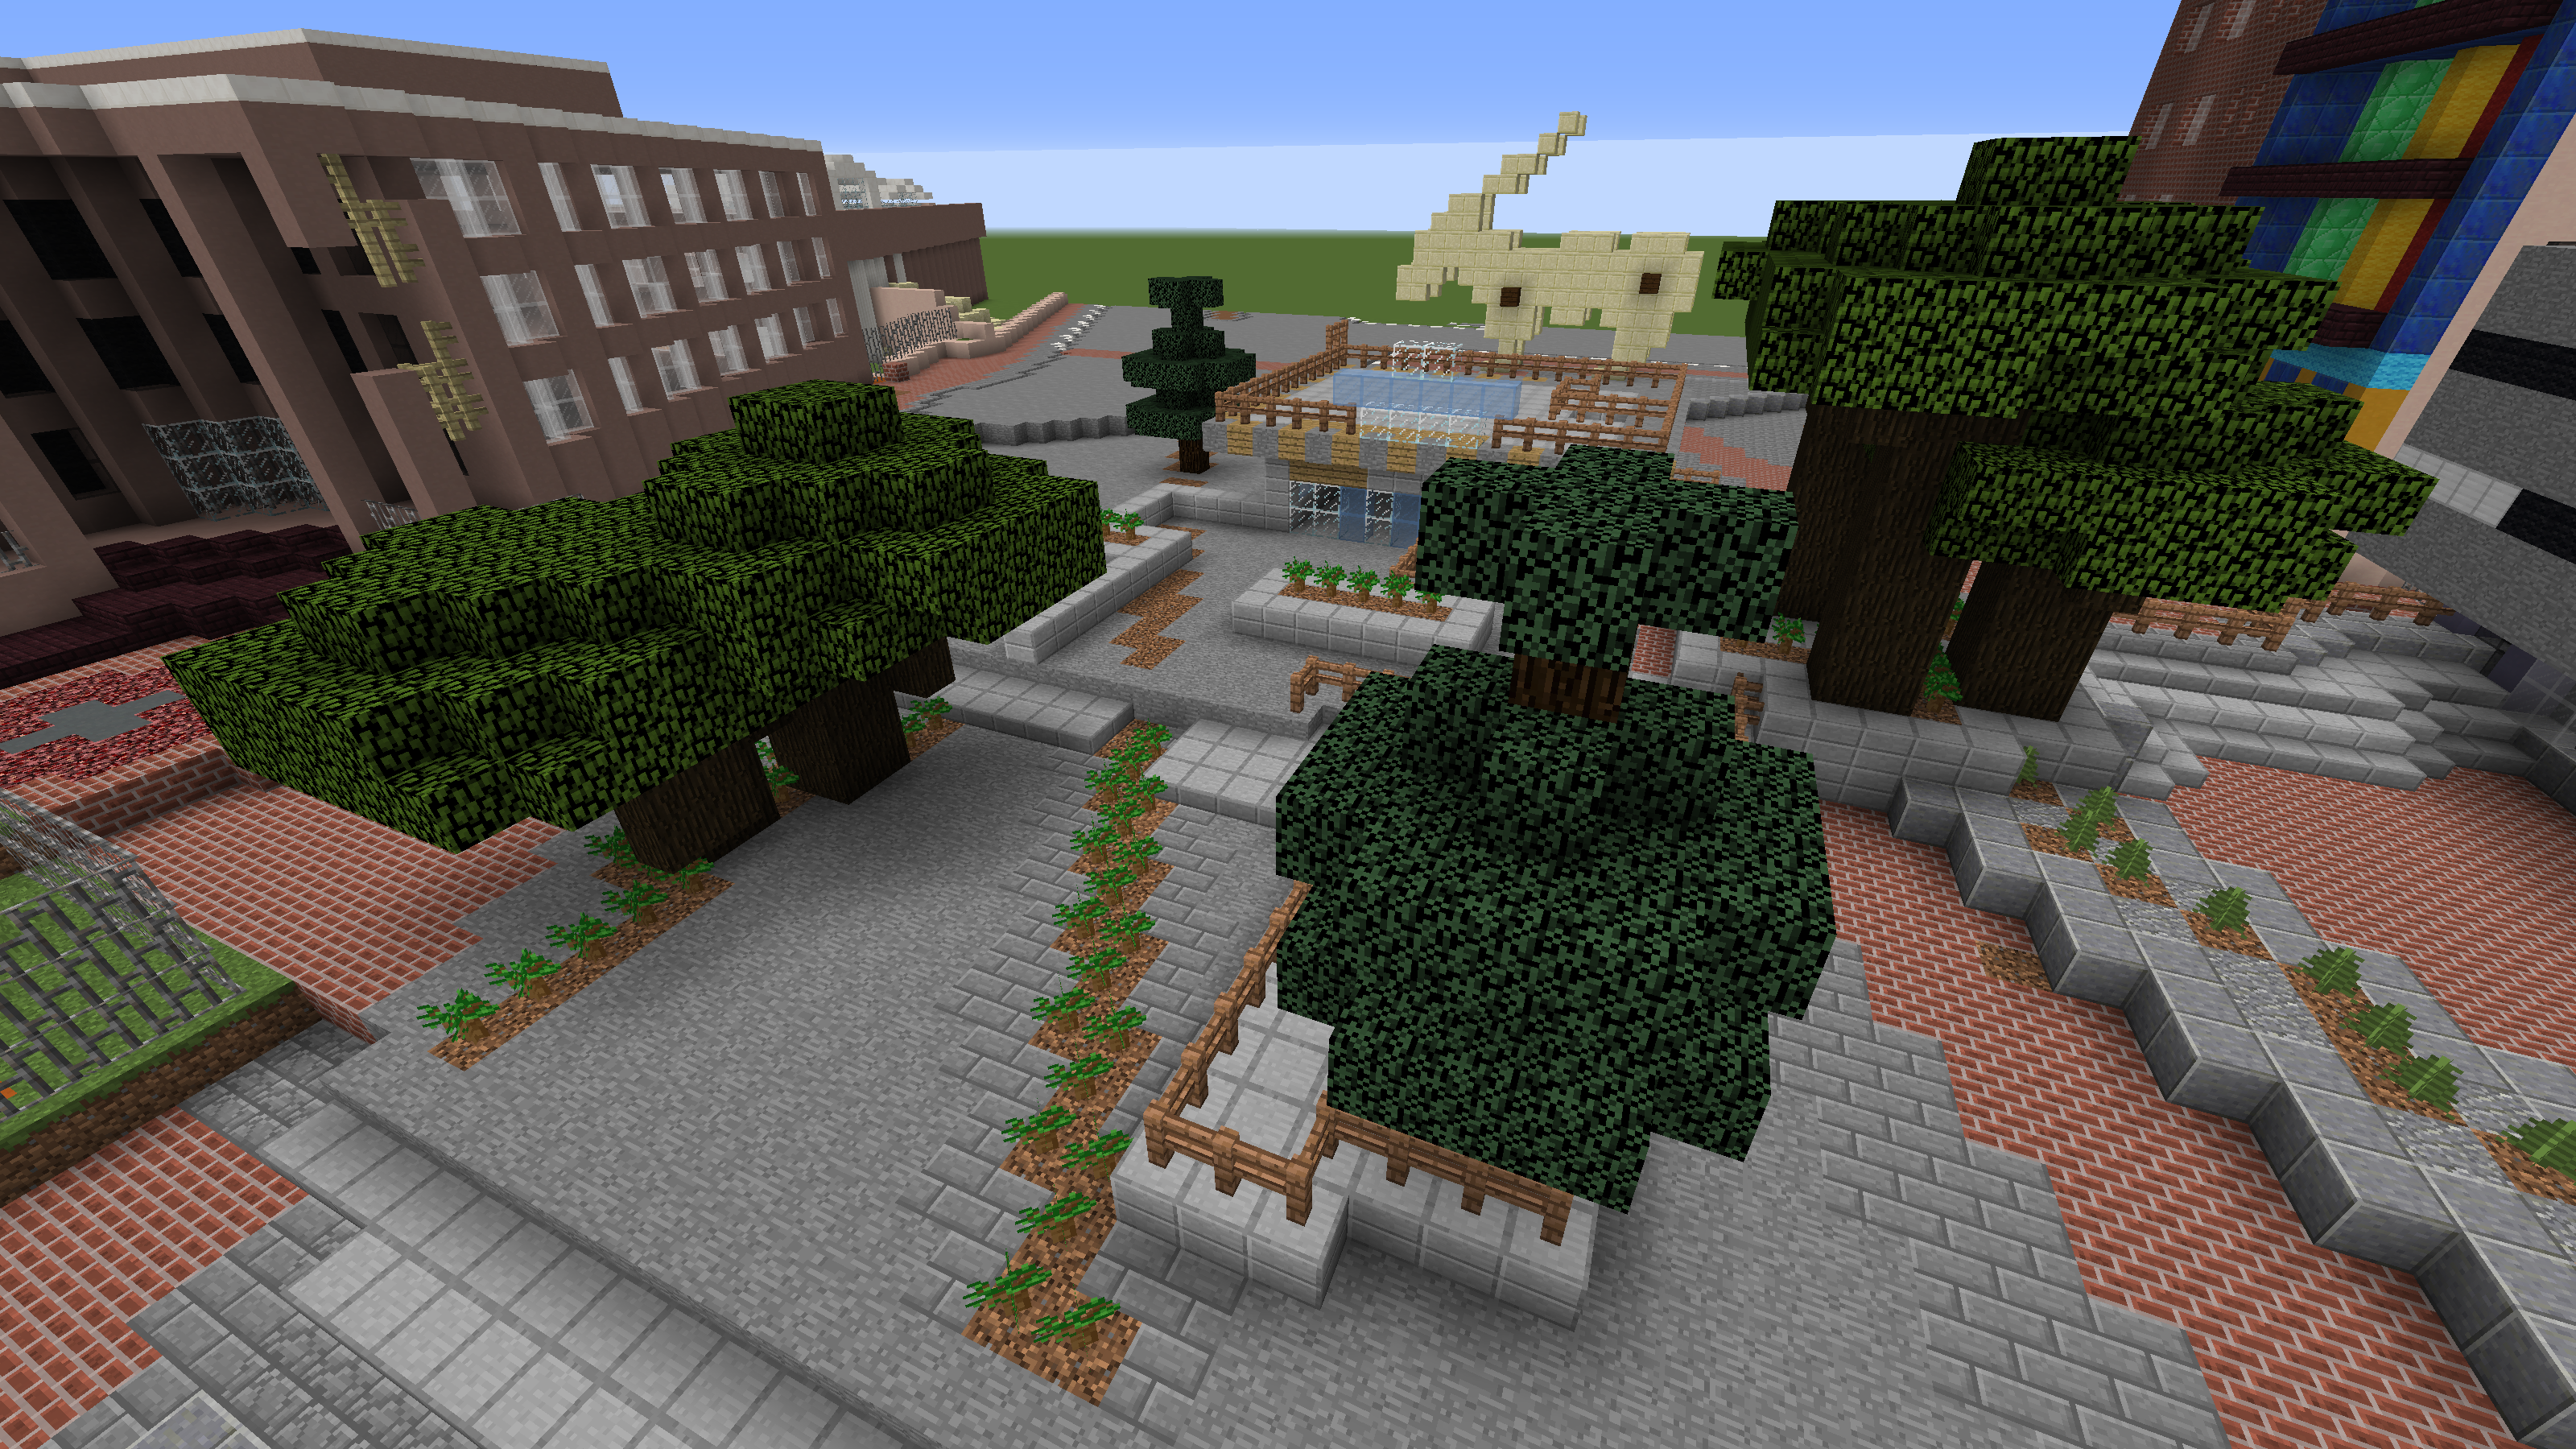 One participant’s Minecraft model shows a public space in Braamfontein with abundant vegetation. 